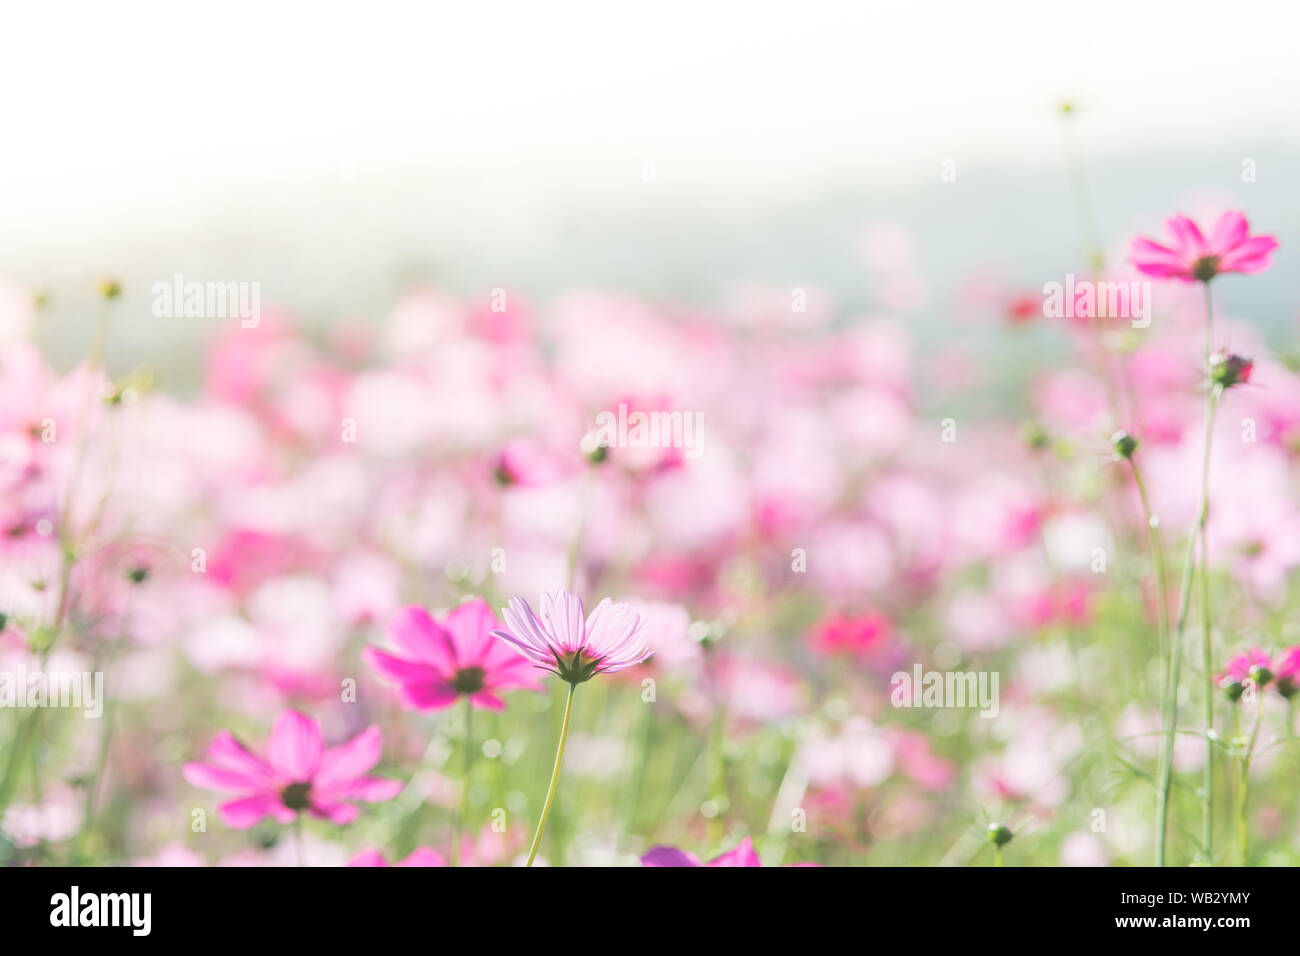 Cosmos flowers in nature, sweet background, blurry flower background, light pink and deep pink cosmos Stock Photo